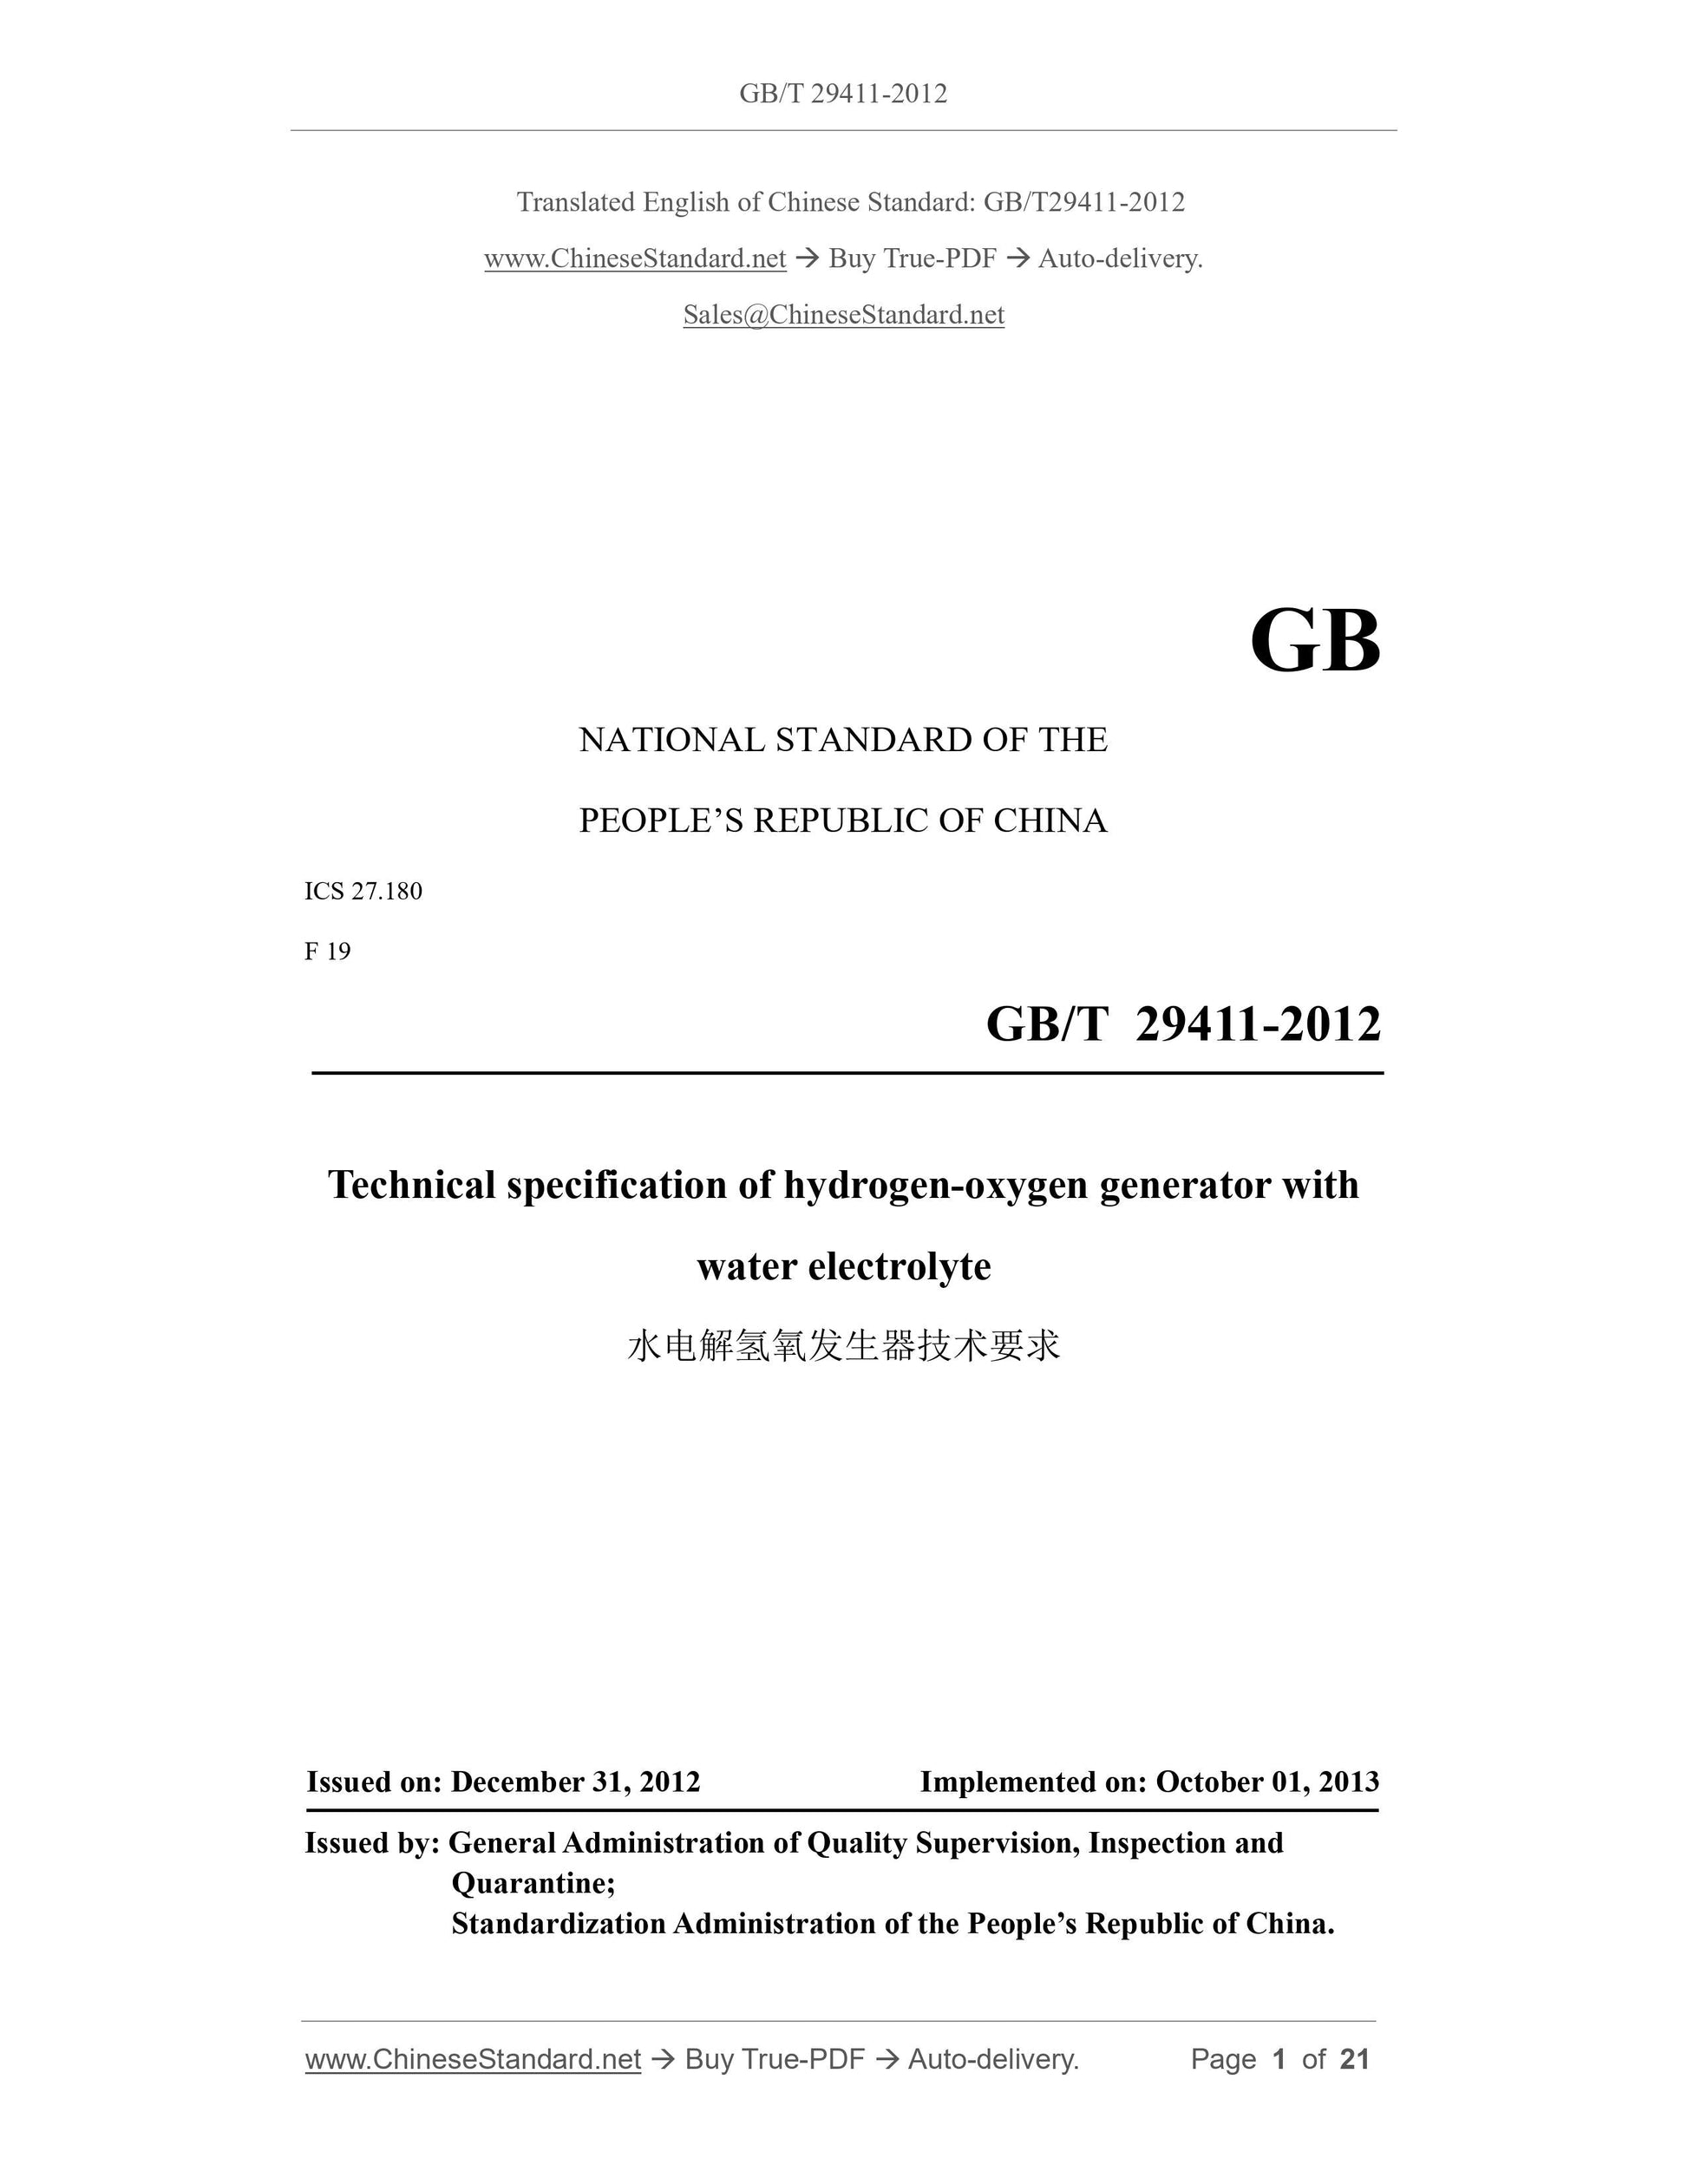 GB/T 29411-2012 Page 1